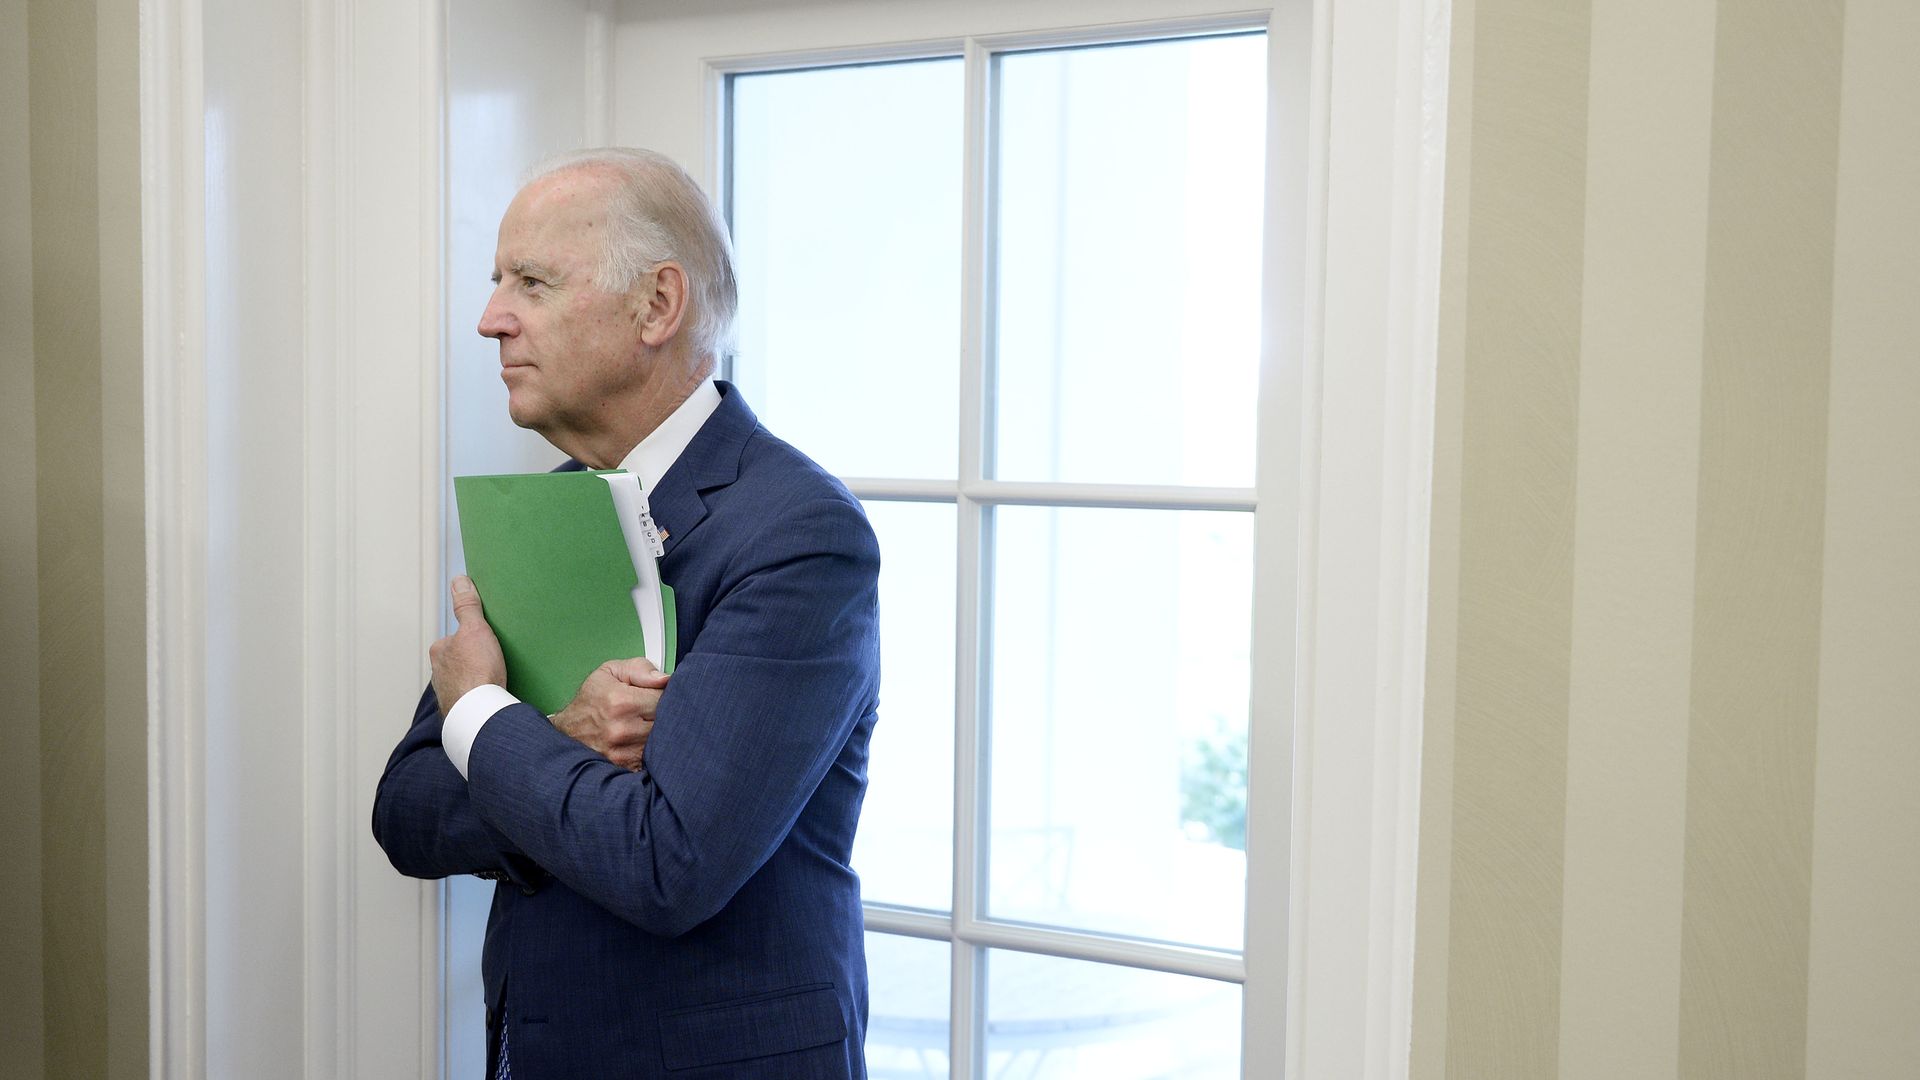 Then-Vice President Joe Biden is seen looking on as President Obama meets with Saudi officials in 2015.